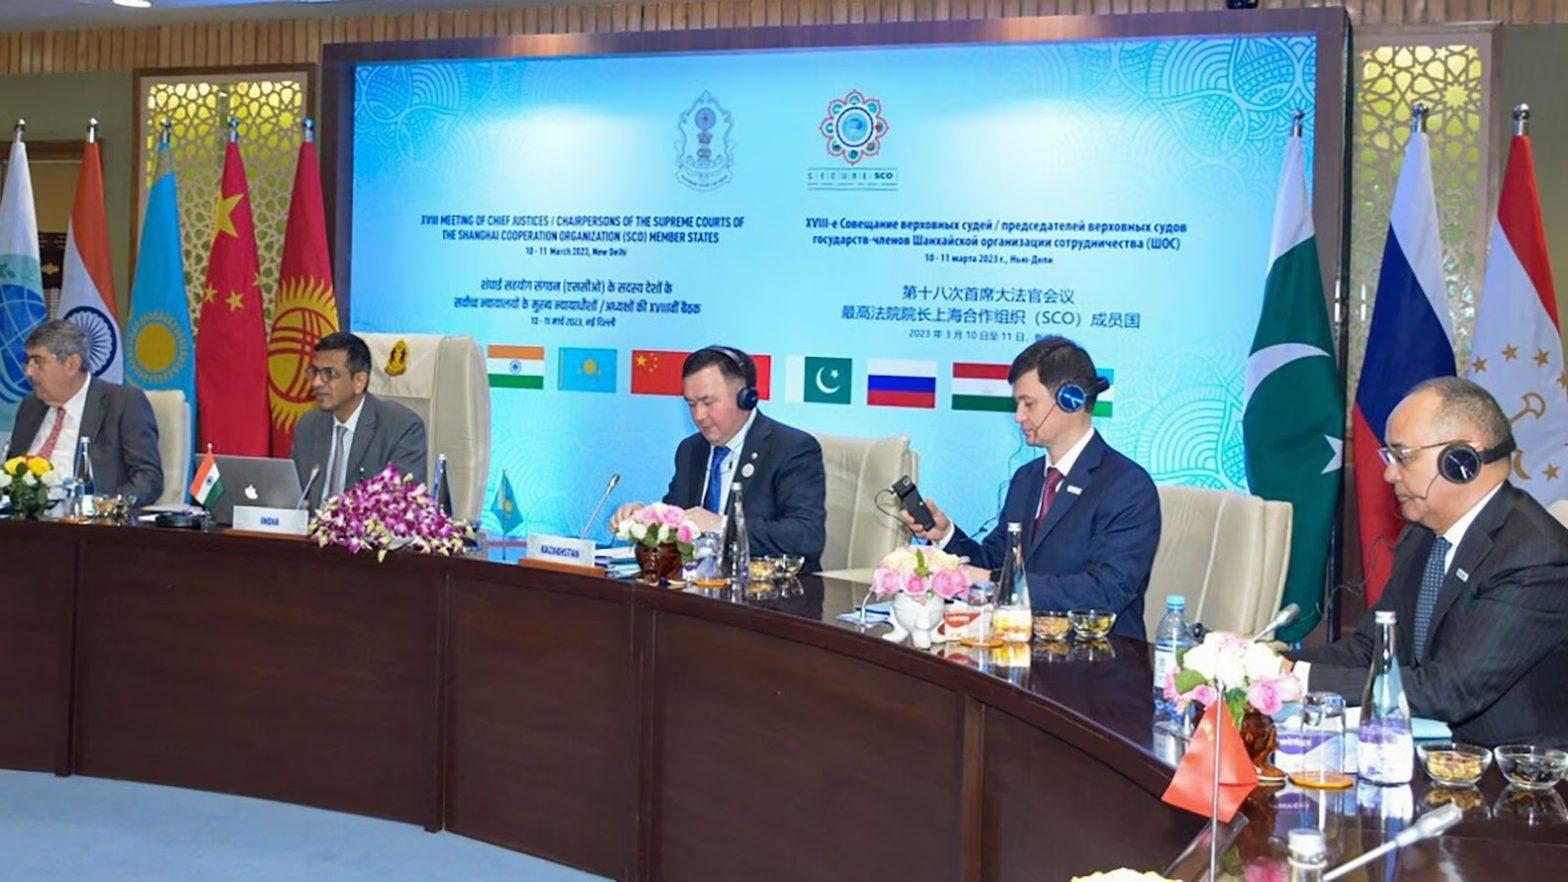 The 10th Meeting Of The Ministers Of Law And Justice Of SCO Countries Took Place